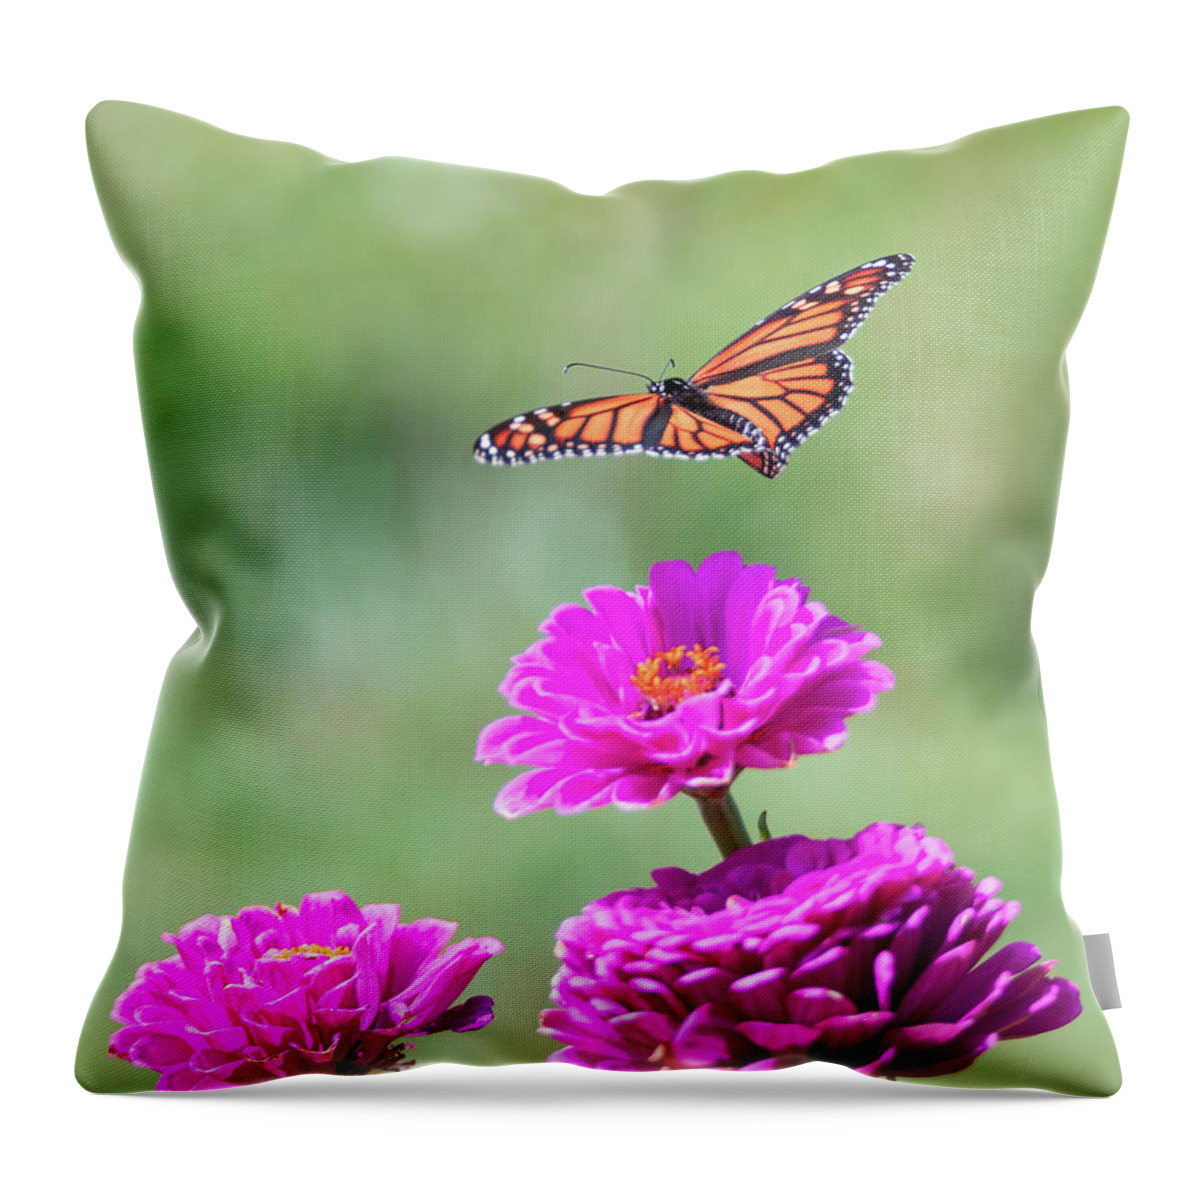 Butterfly Flying Flight Mid-air Mid Air Monarch Inset Butterflies Flowers Garden Botany Botanical Outside Outdoors Nature Natural Brian Hale Brianhalephoto Ma Mass Massachusetts Newengland New England U.s.a. Usa Throw Pillow featuring the photograph Monarch in Flight 2 by Brian Hale